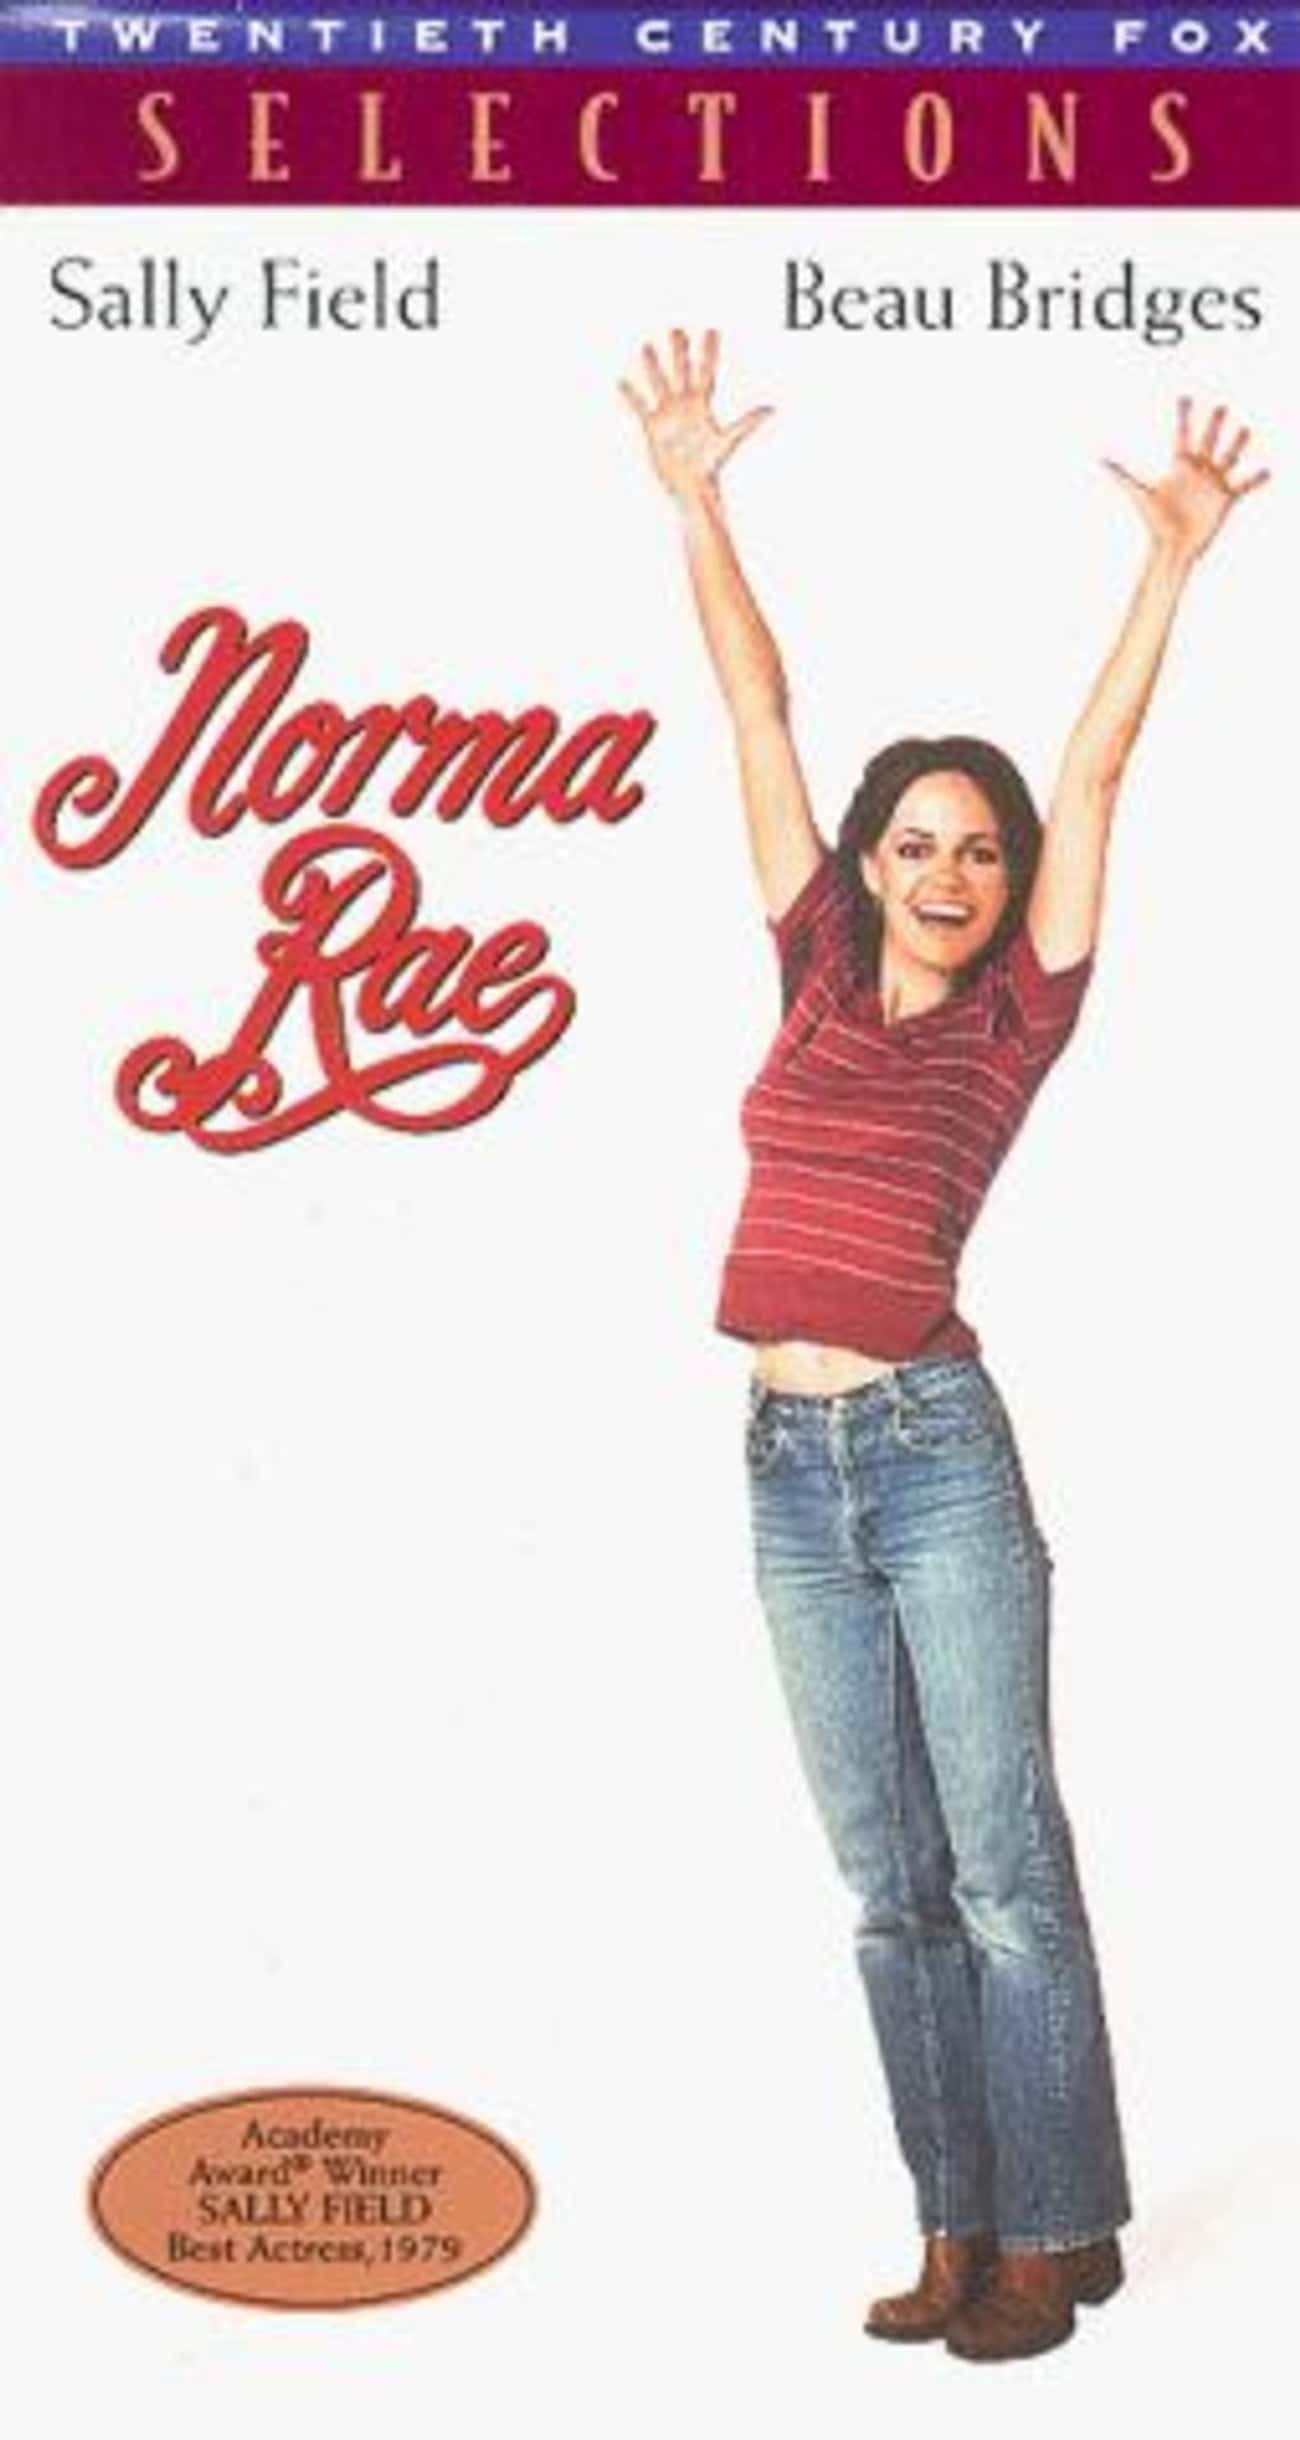 'Norma Rae' Looks Like A Cheerful, Quirky Comedy